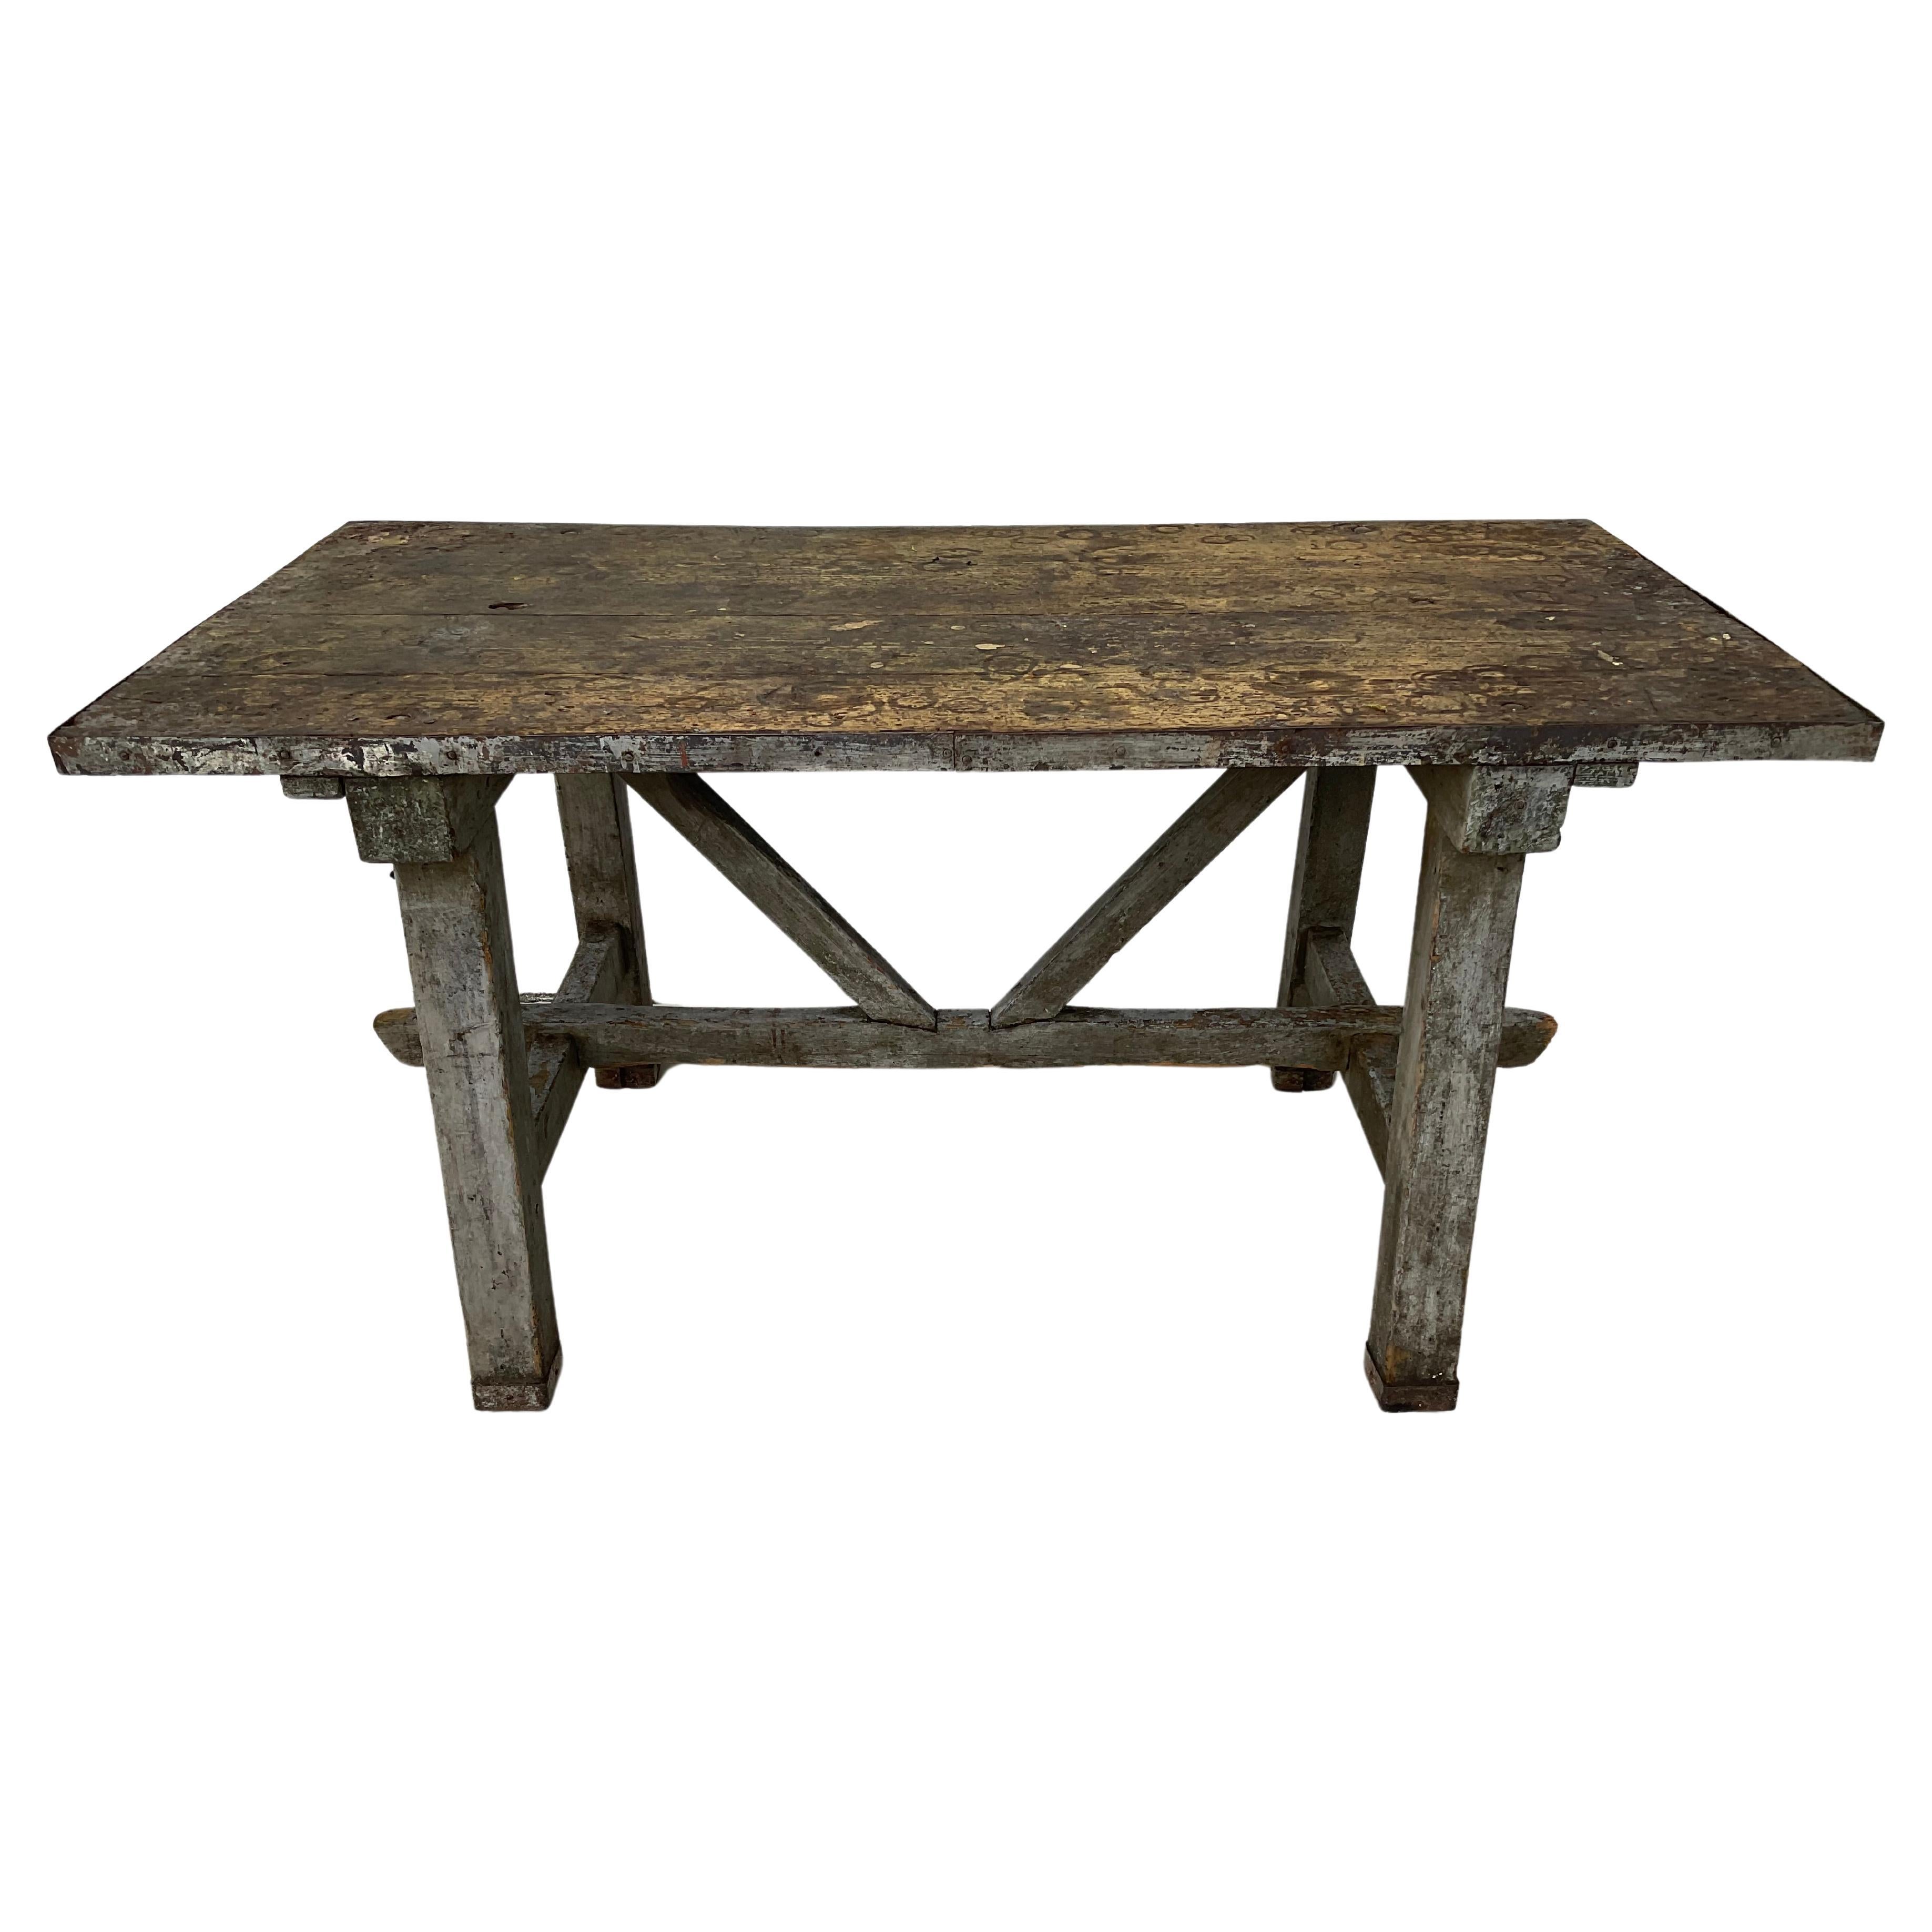 19th Century French Rustic Industrial Dining or Writing Table or Desk For Sale 5